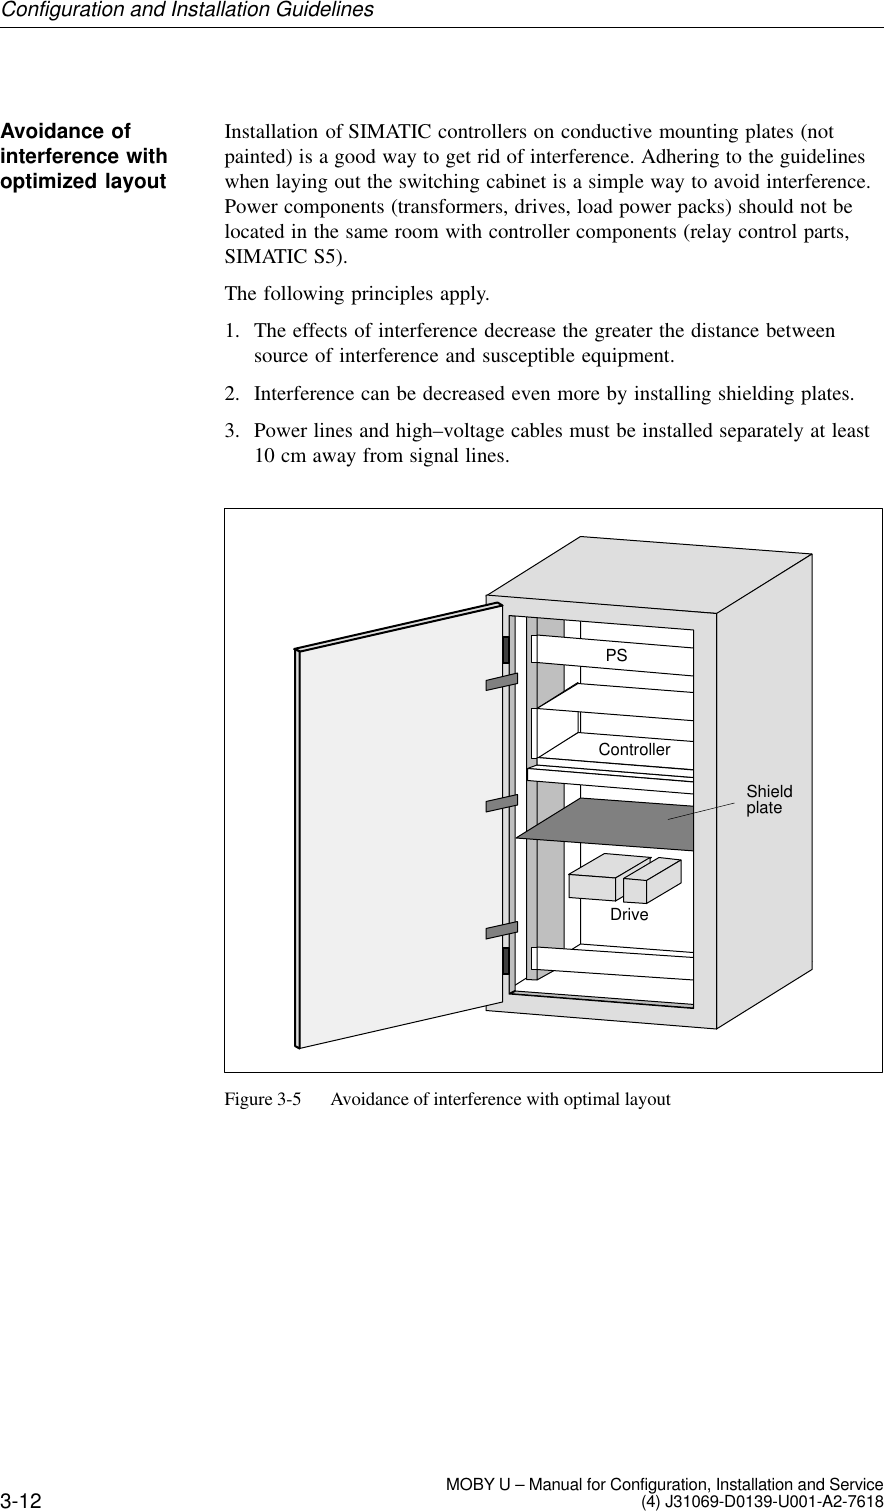 3-12 MOBY U – Manual for Configuration, Installation and Service(4) J31069-D0139-U001-A2-7618Installation of SIMATIC controllers on conductive mounting plates (notpainted) is a good way to get rid of interference. Adhering to the guidelineswhen laying out the switching cabinet is a simple way to avoid interference.Power components (transformers, drives, load power packs) should not belocated in the same room with controller components (relay control parts,SIMATIC S5).The following principles apply.1. The effects of interference decrease the greater the distance betweensource of interference and susceptible equipment.2. Interference can be decreased even more by installing shielding plates.3. Power lines and high–voltage cables must be installed separately at least10 cm away from signal lines.PSControllerDriveShieldplateFigure 3-5 Avoidance of interference with optimal layoutAvoidance ofinterference withoptimized layoutConfiguration and Installation Guidelines